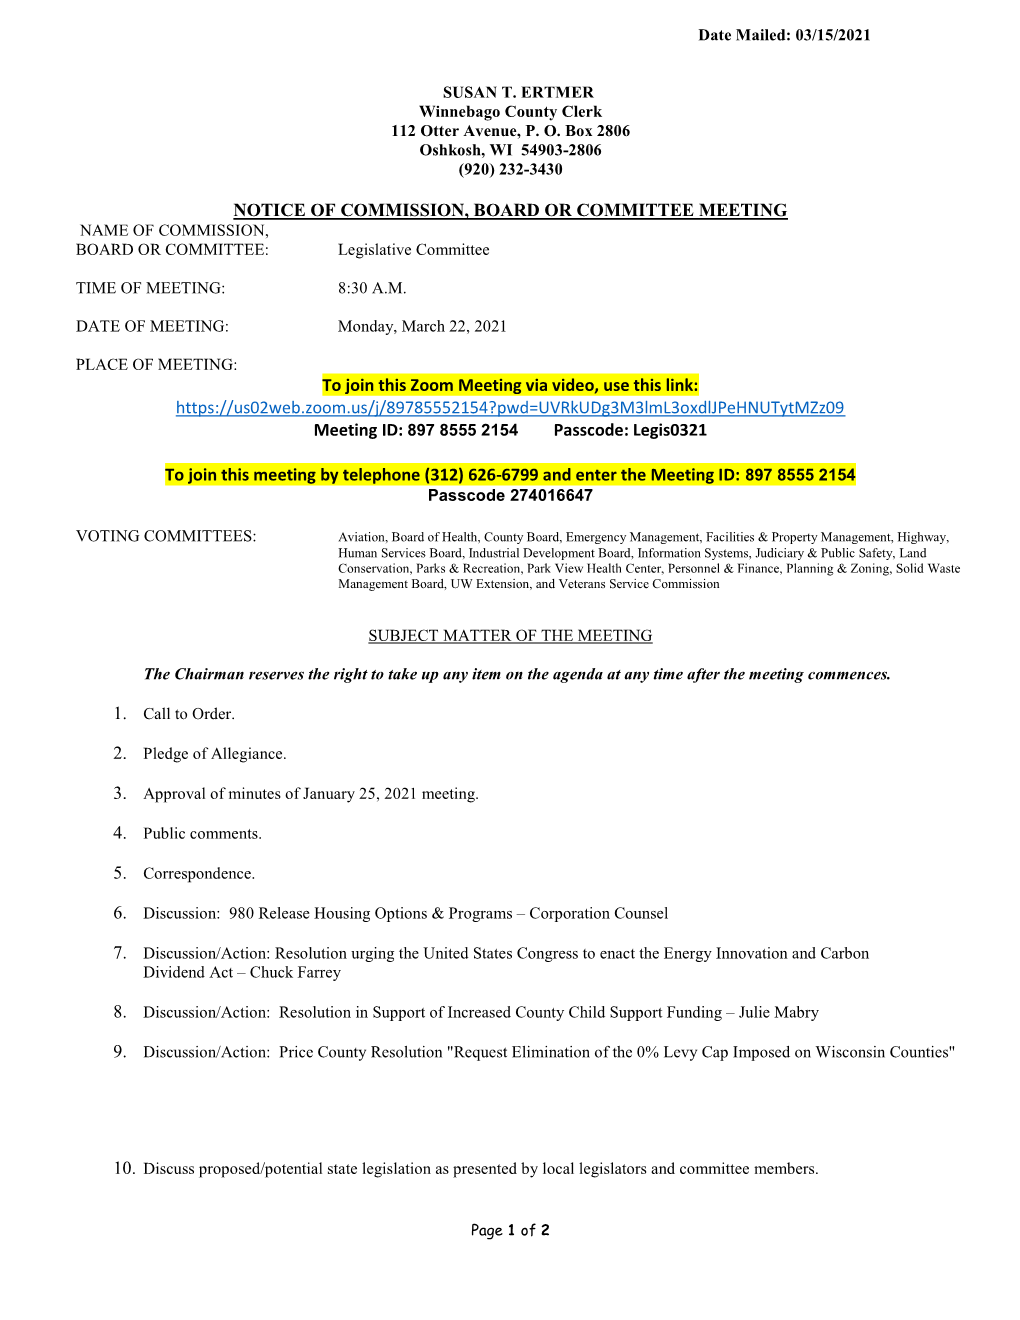 NOTICE of COMMISSION, BOARD OR COMMITTEE MEETING to Join